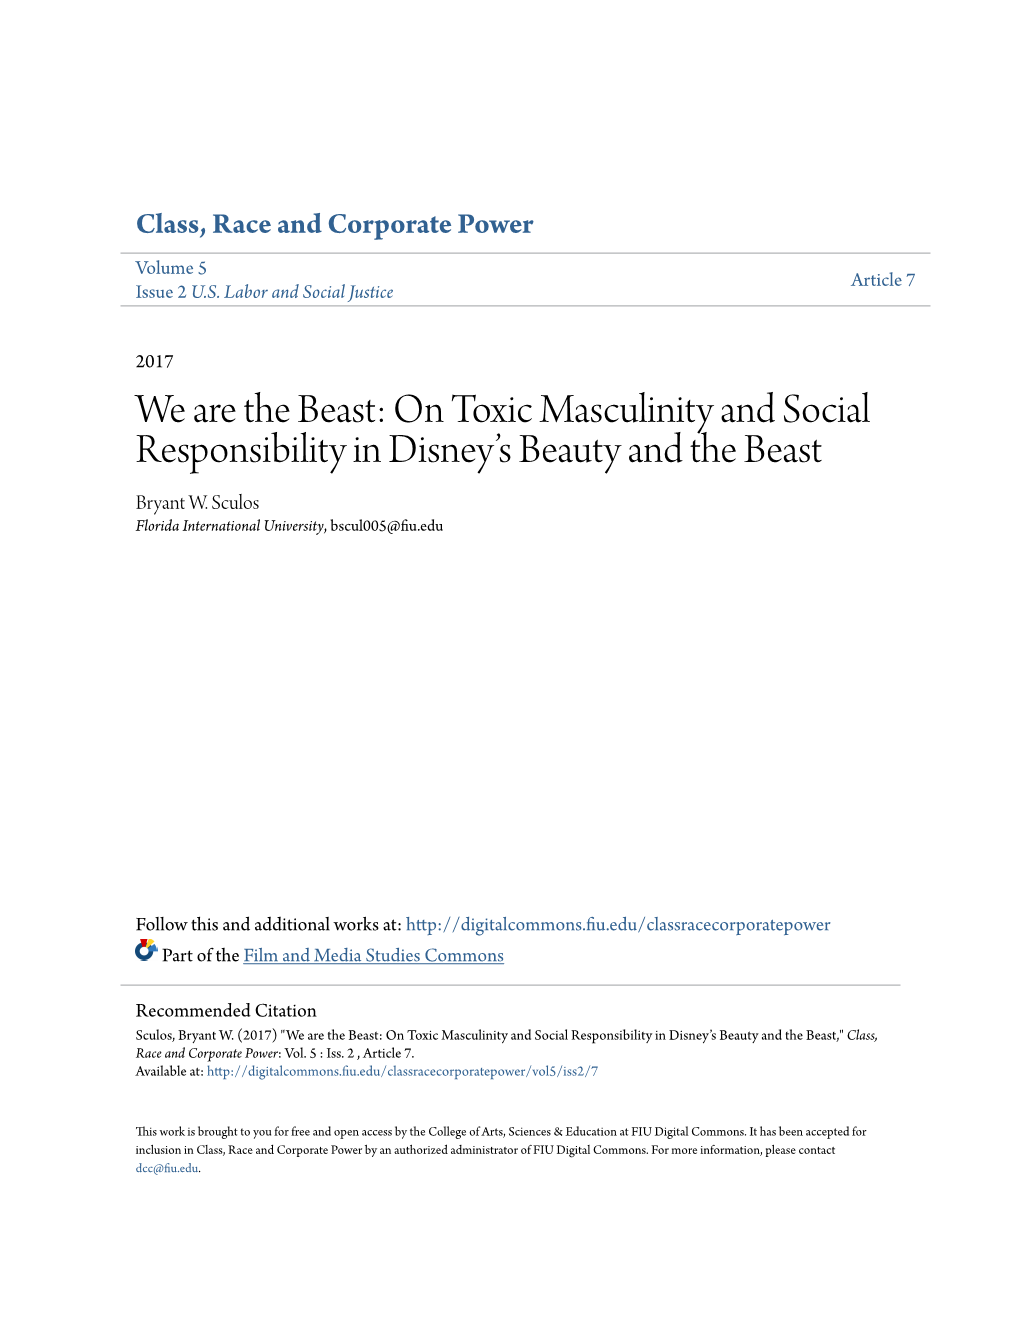 On Toxic Masculinity and Social Responsibility in Disney's Beauty and the Beast